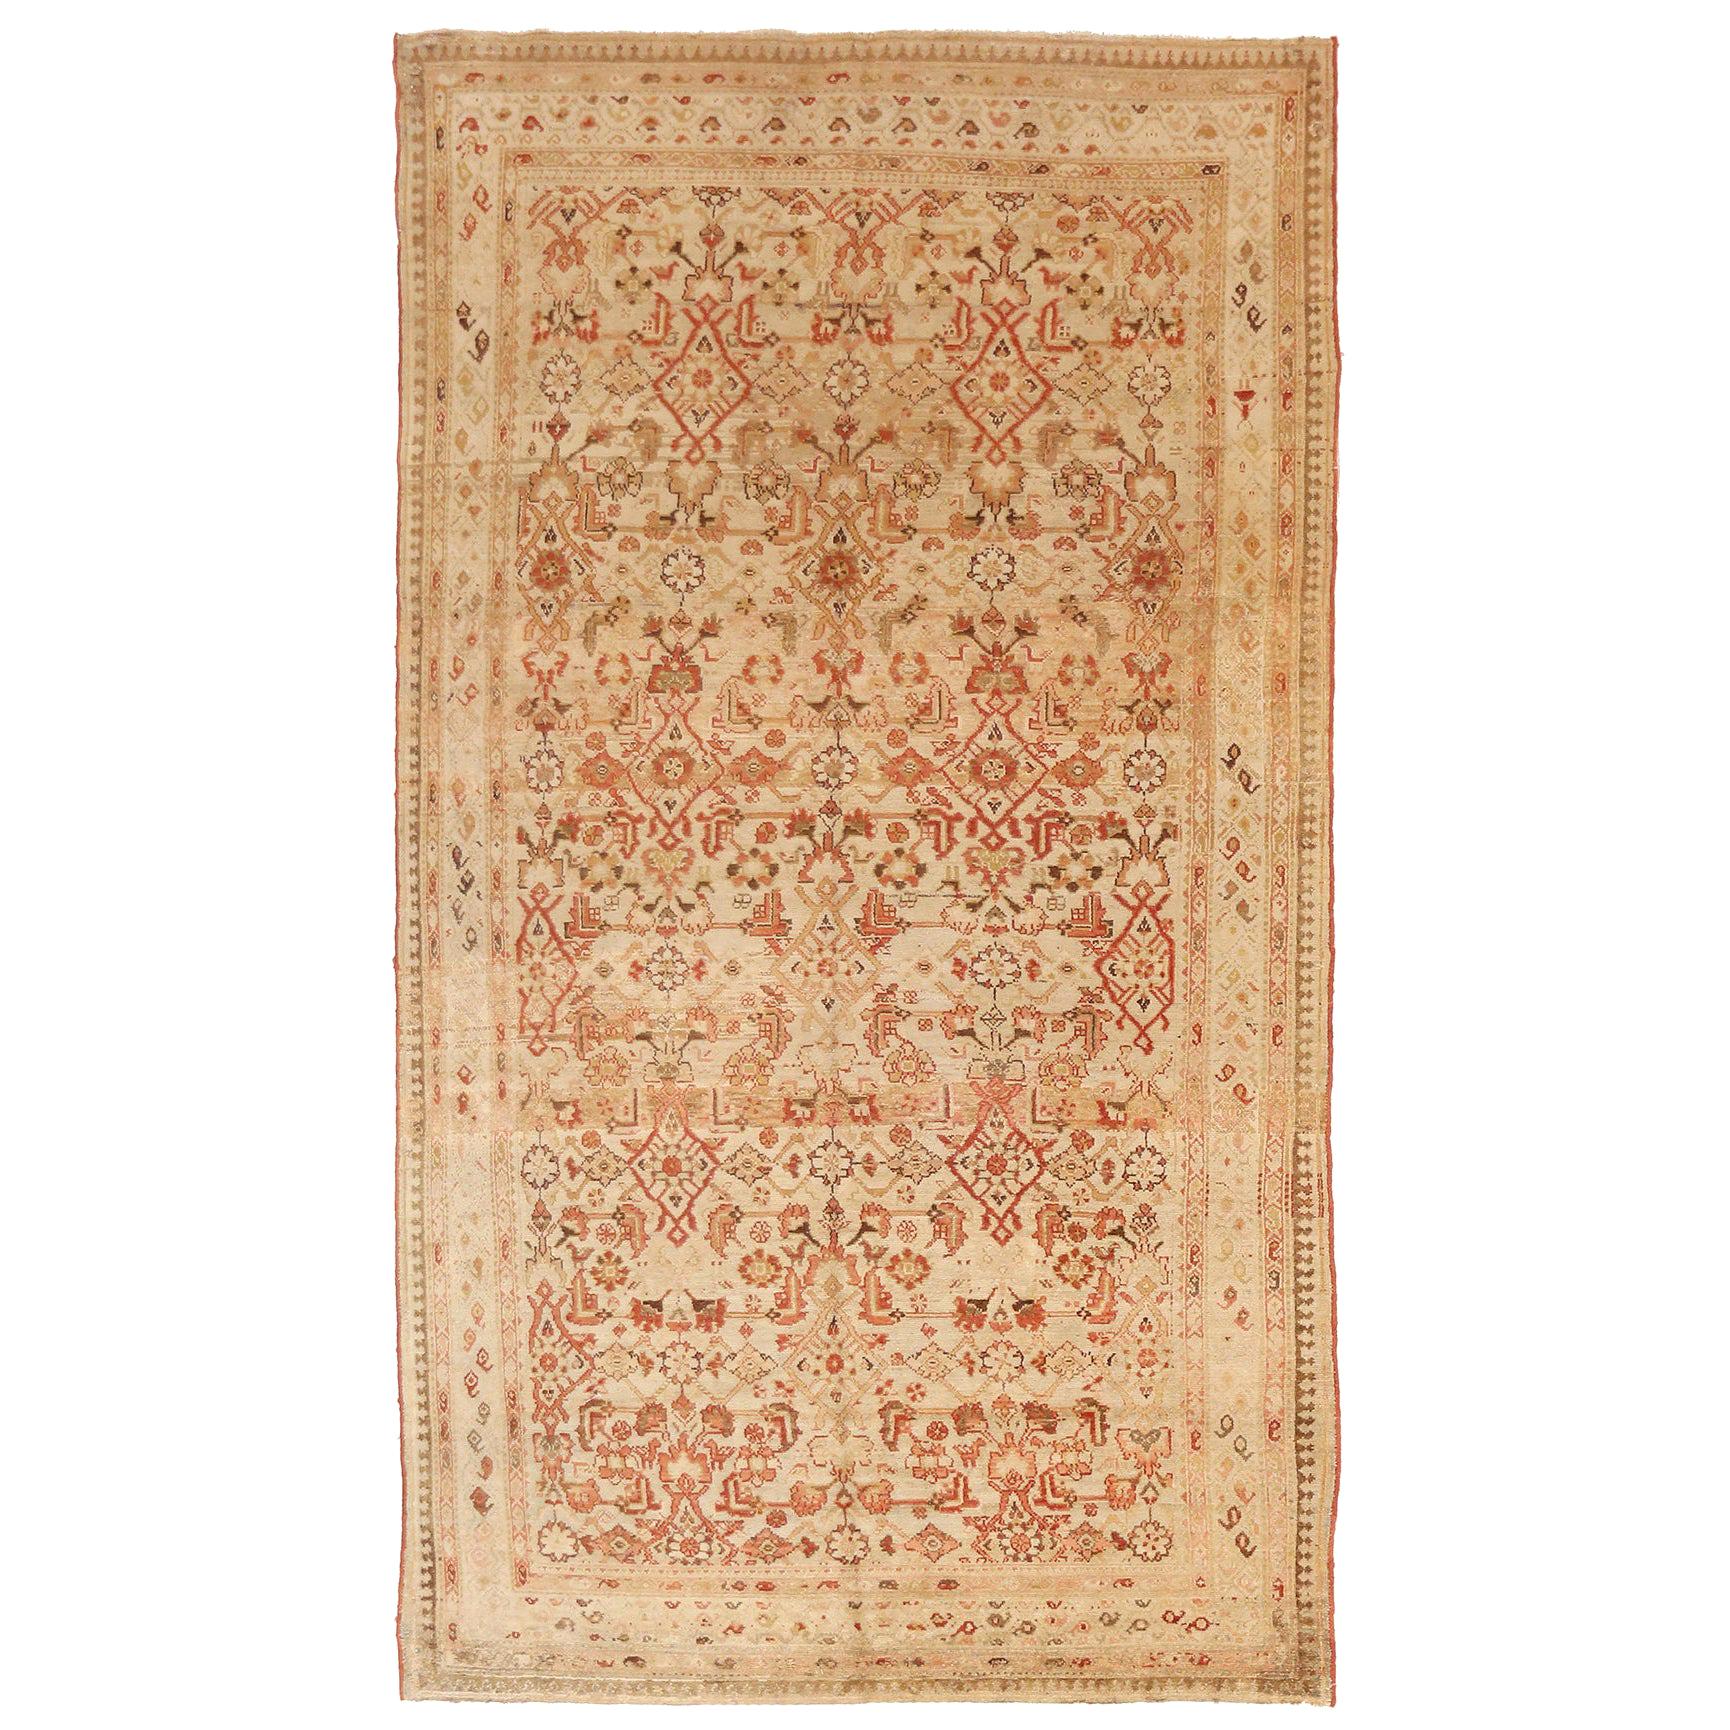 Antique Persian Malayer Rug with Red and Beige Floral Details on Ivory Field